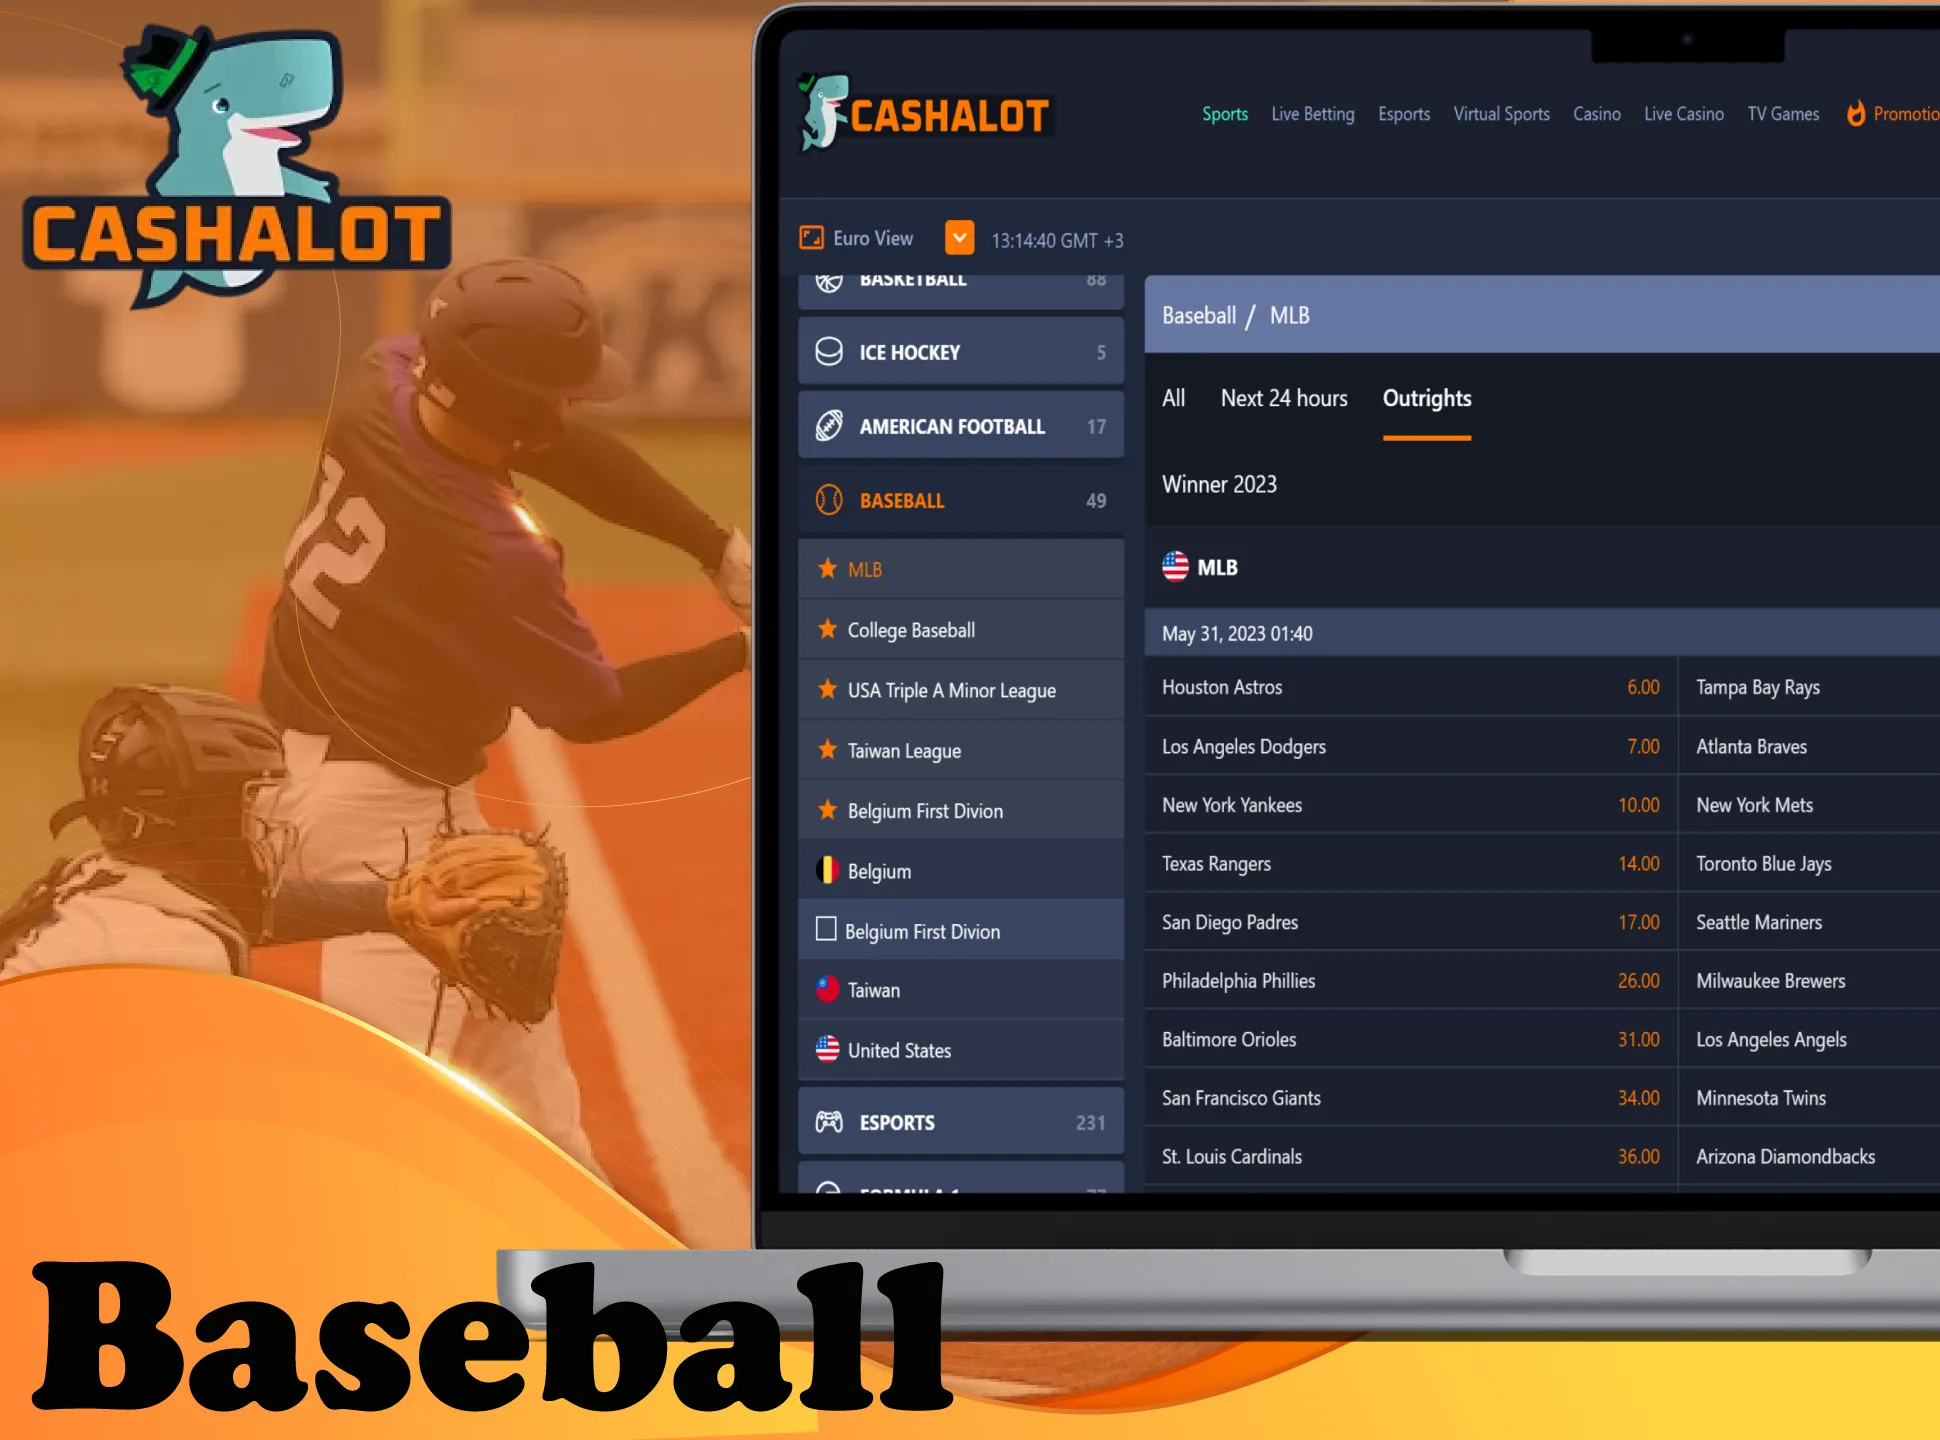 Bet on the most popular sport in America at the Cashalot.